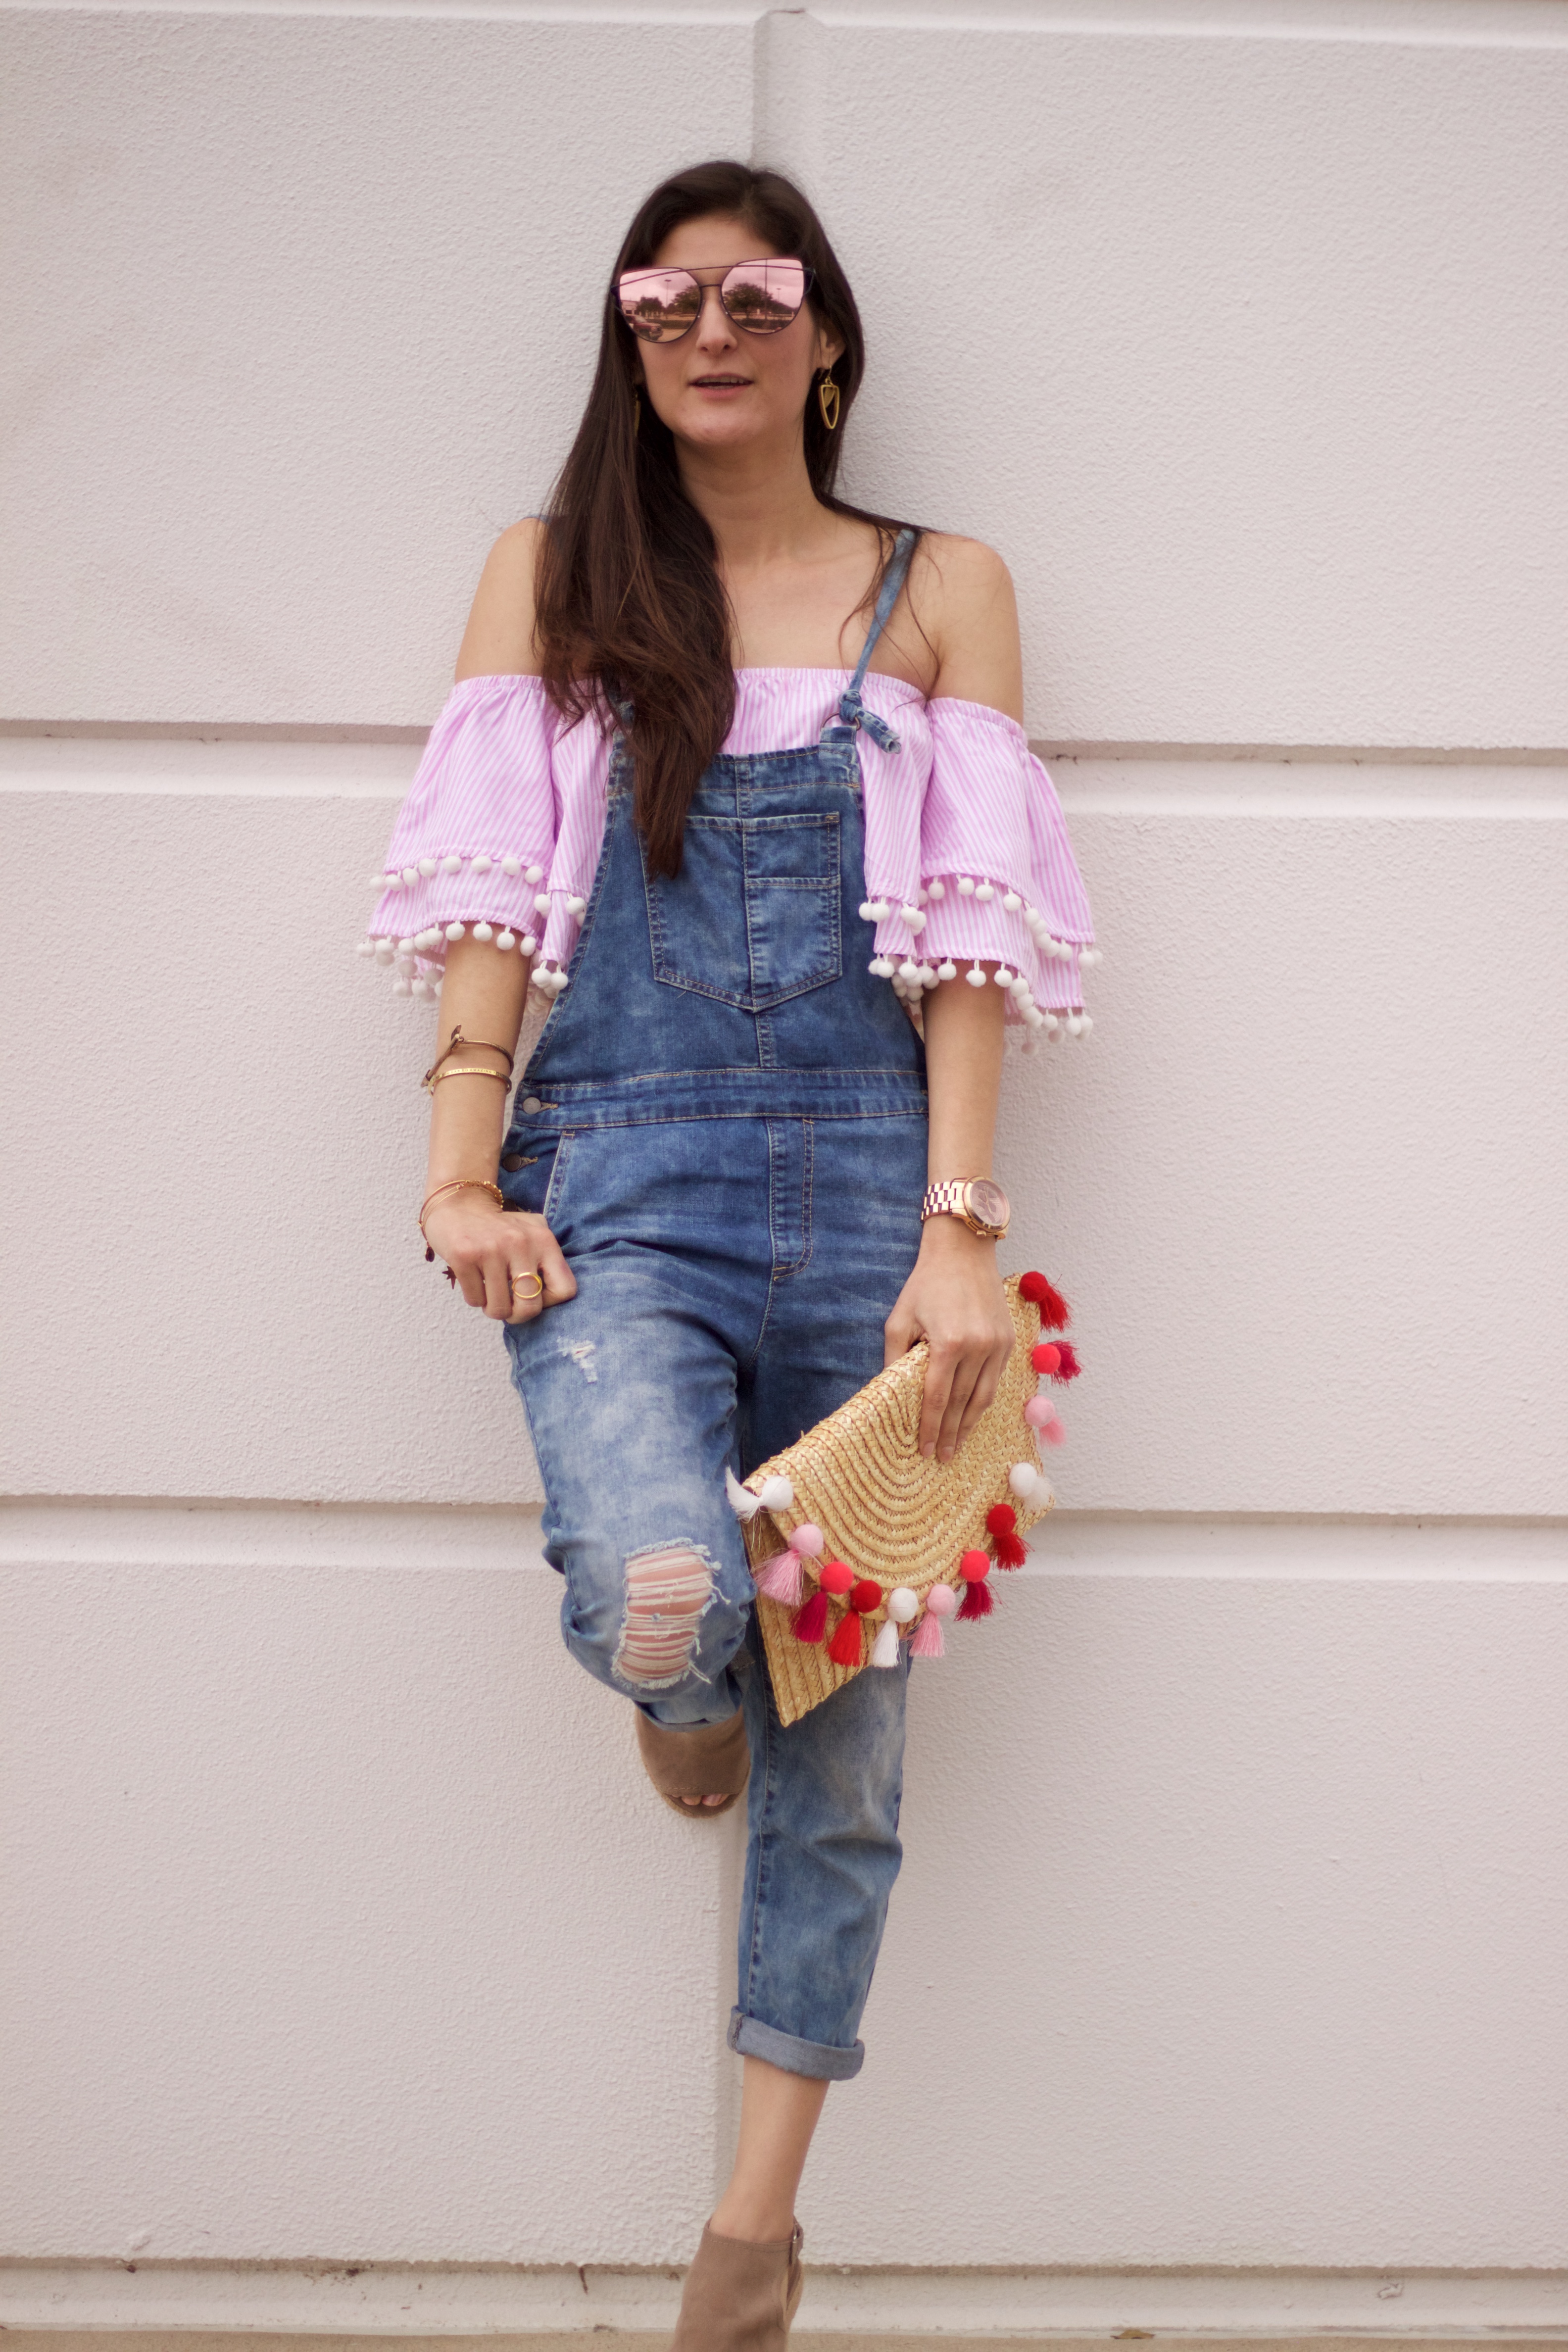 Jenni Metz Fashion blogger modeling overalls and off the shoulder top